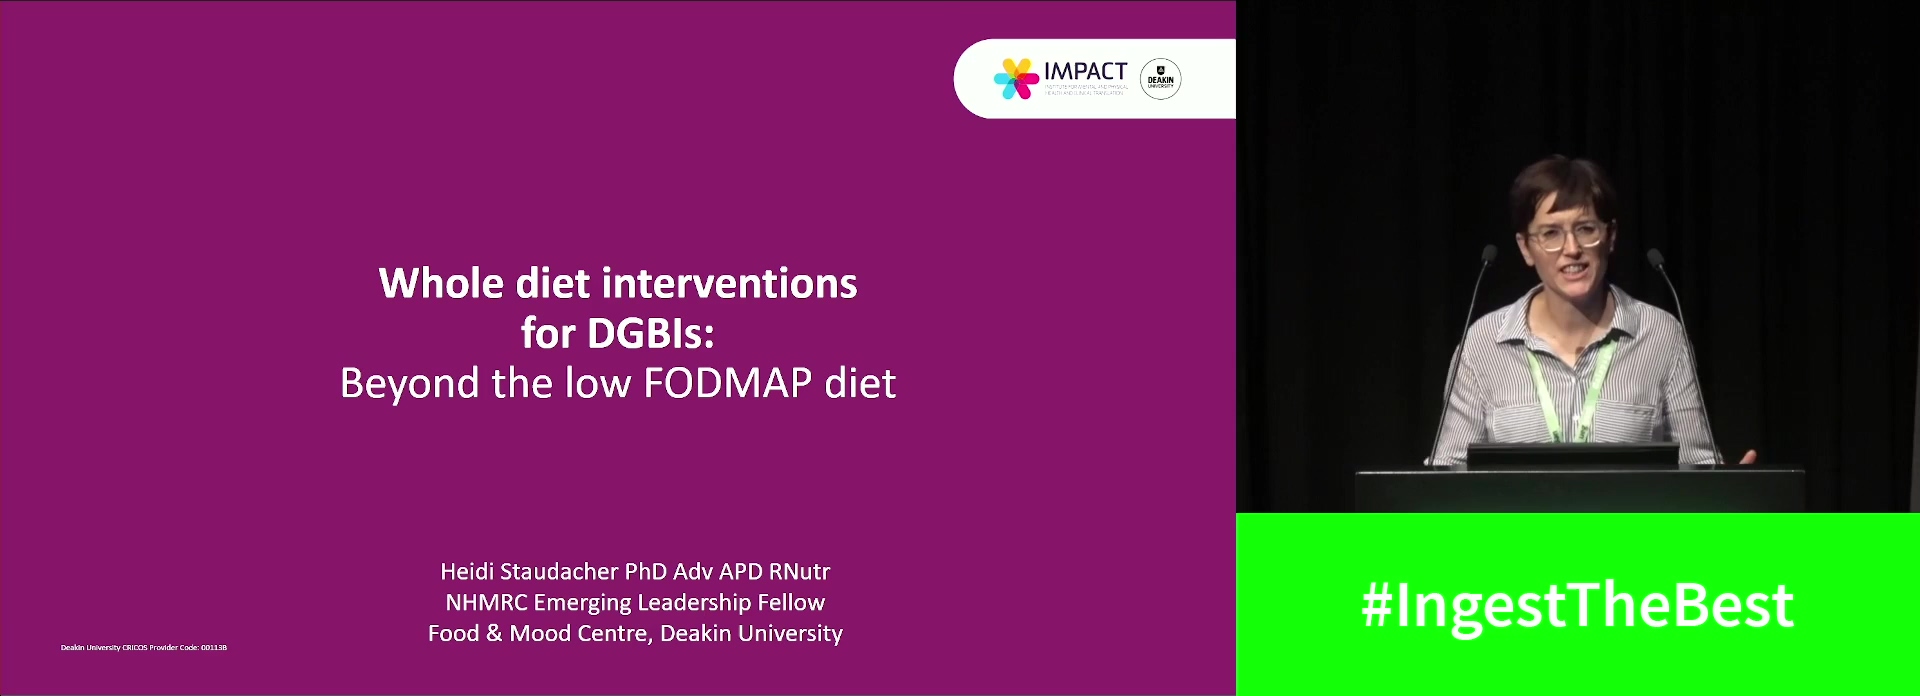 Whole diet interventions for DGBI: Beyond the low FODMAP diet